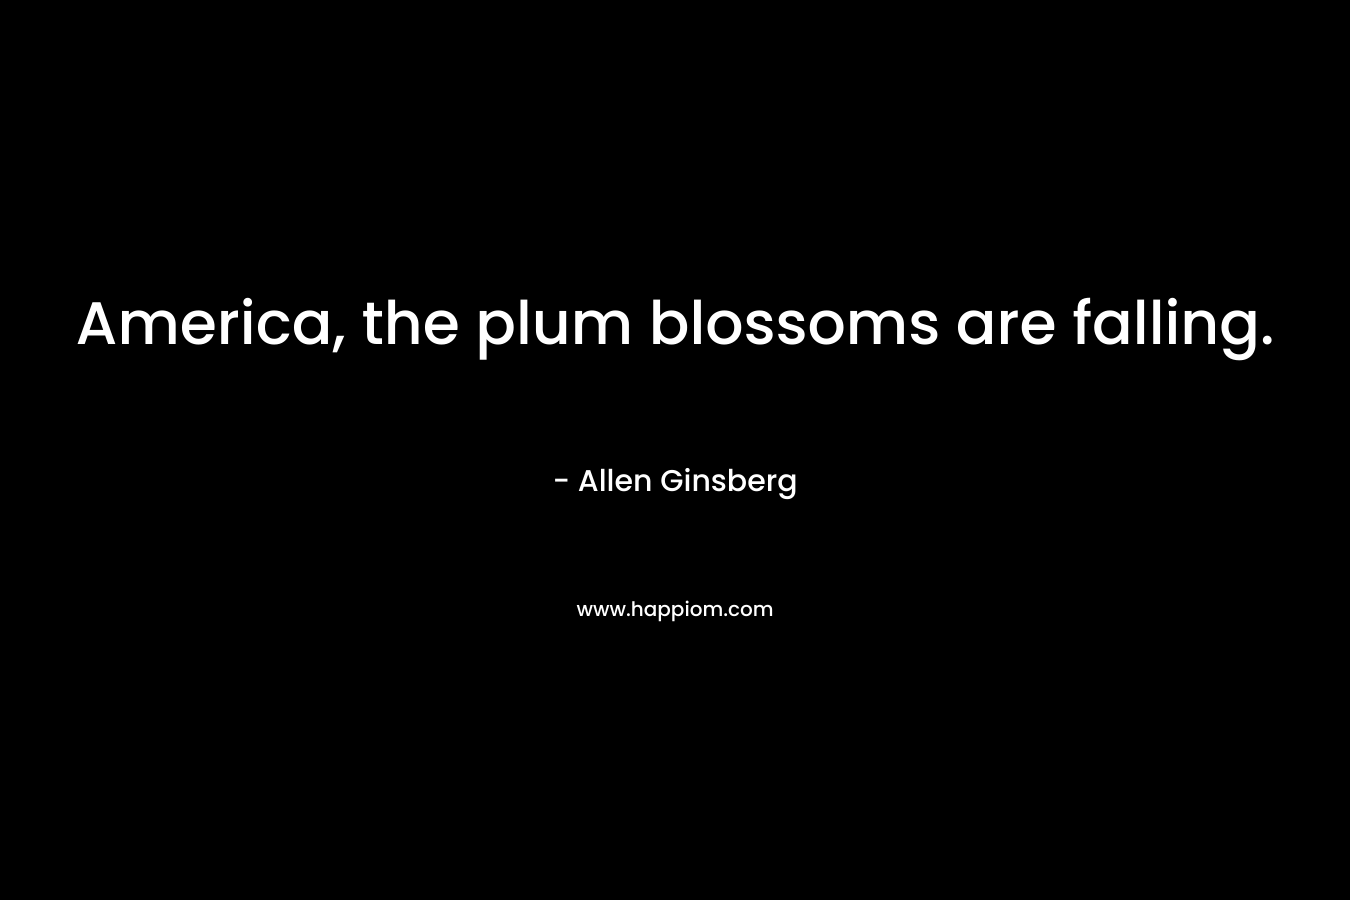 America, the plum blossoms are falling. – Allen Ginsberg